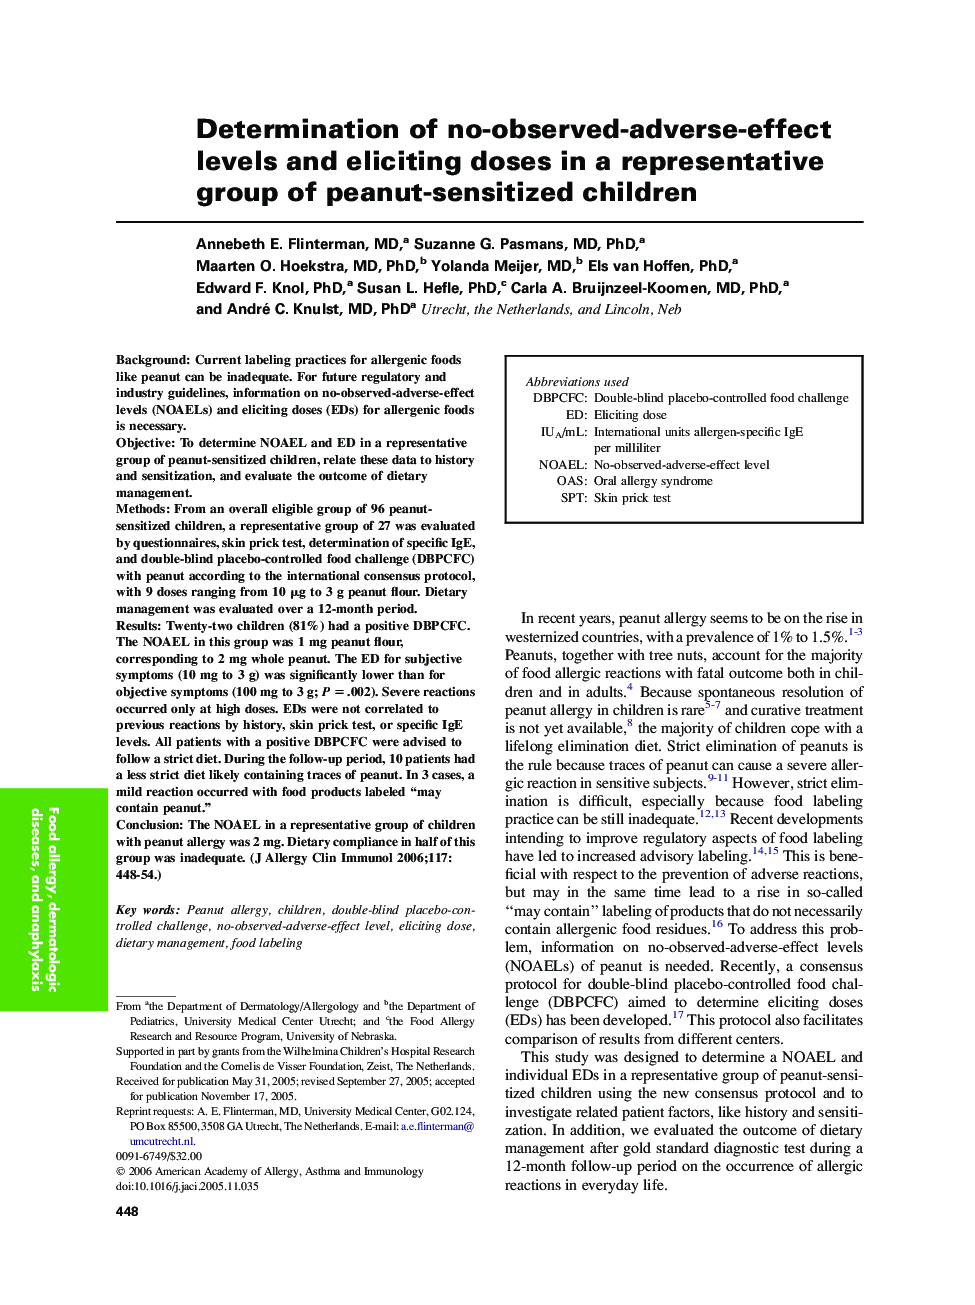 Determination of no-observed-adverse-effect levels and eliciting doses in a representative group of peanut-sensitized children 